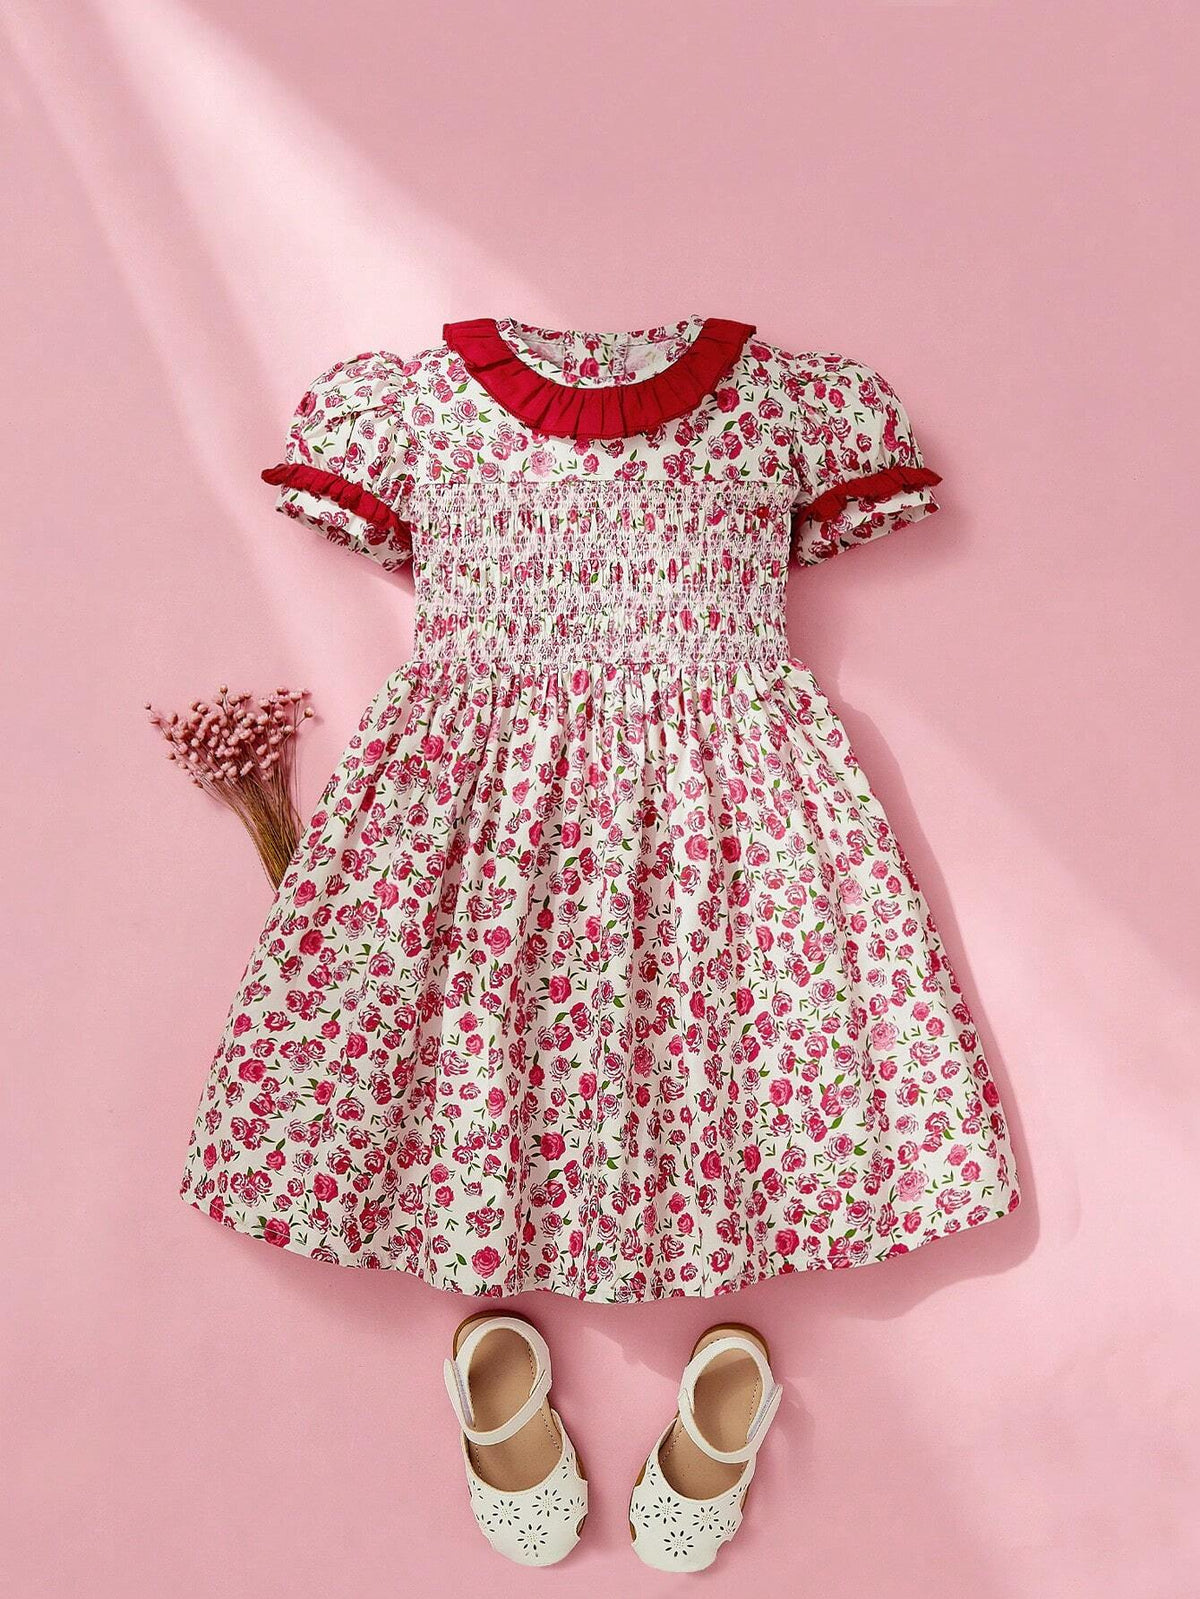 Single Piece Girls" Floral Dress With Ruffled Collar And Puffy Sleeves For Summer